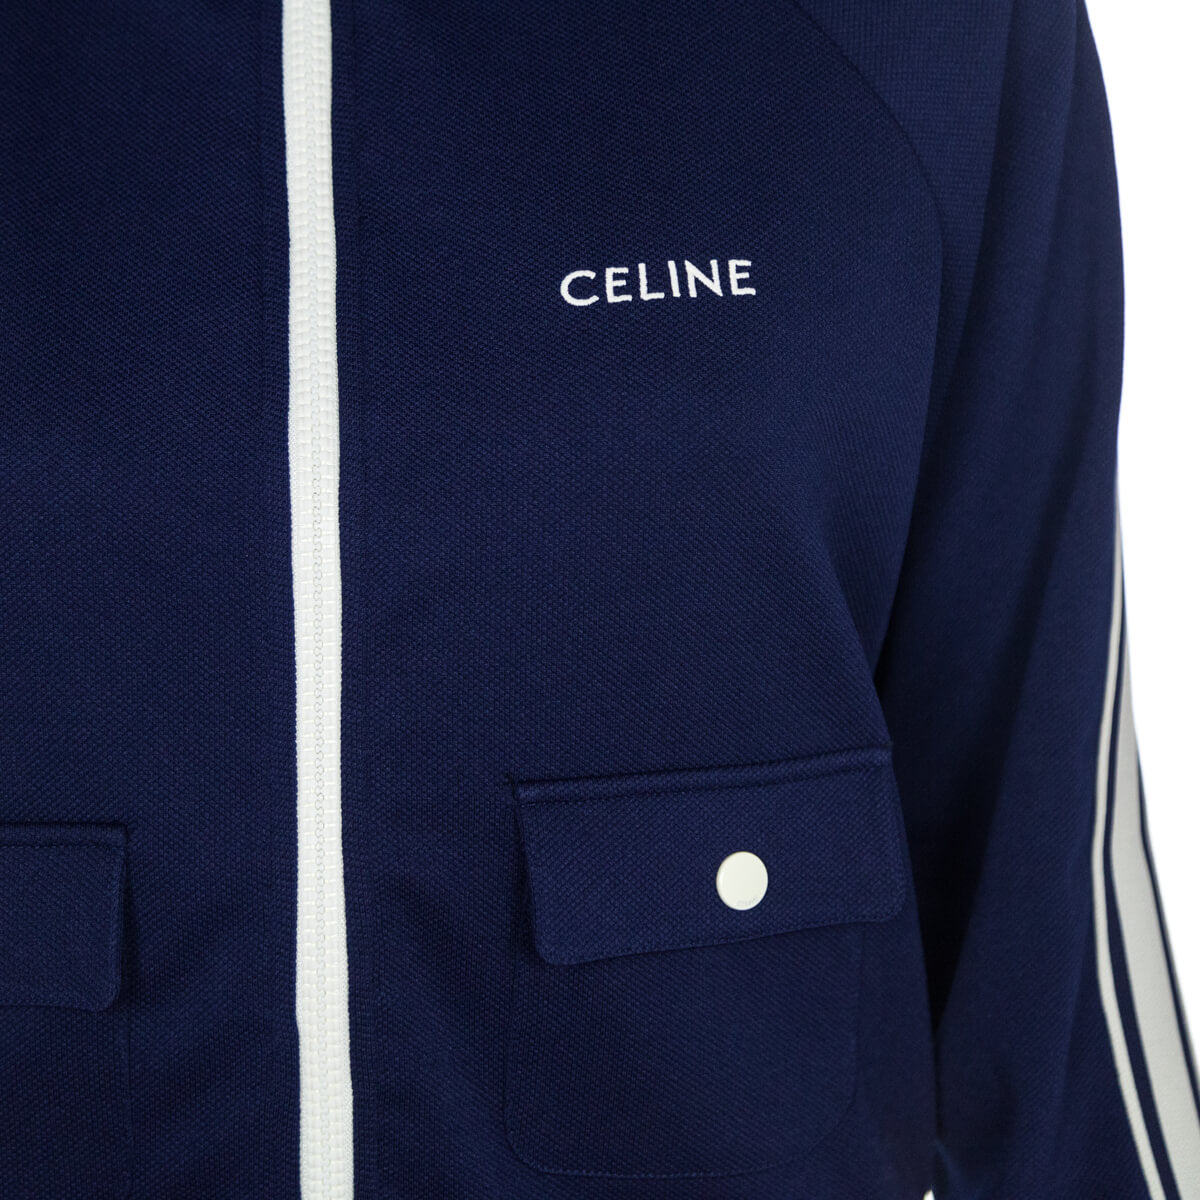 Celine Navy & Off White Texturized Jersey Cropped Tracksuit Jacket & Skirt Set Size M/L - Love that Bag etc - Preowned Authentic Designer Handbags & Preloved Fashions